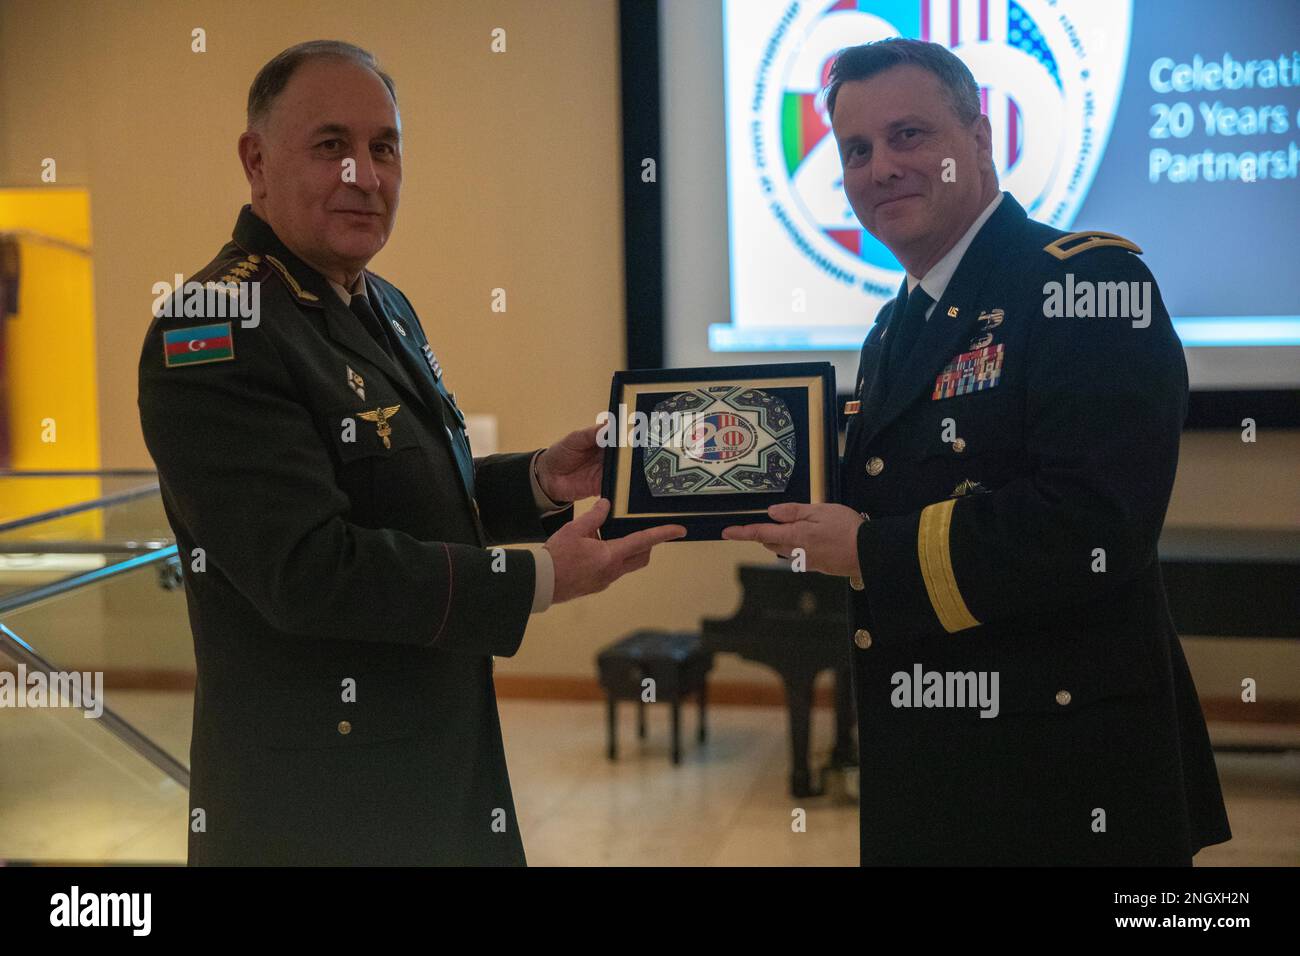 Colonel General Karim Valiyeva, First Deputy Minister of Defense and Chief of the General Staff of the Azerbaijan Army, presents a gift to Brig. Gen. Thomas H. Mancino, adjutant general for Oklahoma, at the Oklahoma City Museum of Art, November 30, 2022. Oklahoma National Guard leaders and a delegation from Azerbaijan met to celebrate 20 years of the state partnership program between Oklahoma and Azerbaijan. (Oklahoma National Guard photo by Sgt. Reece Heck) Stock Photo